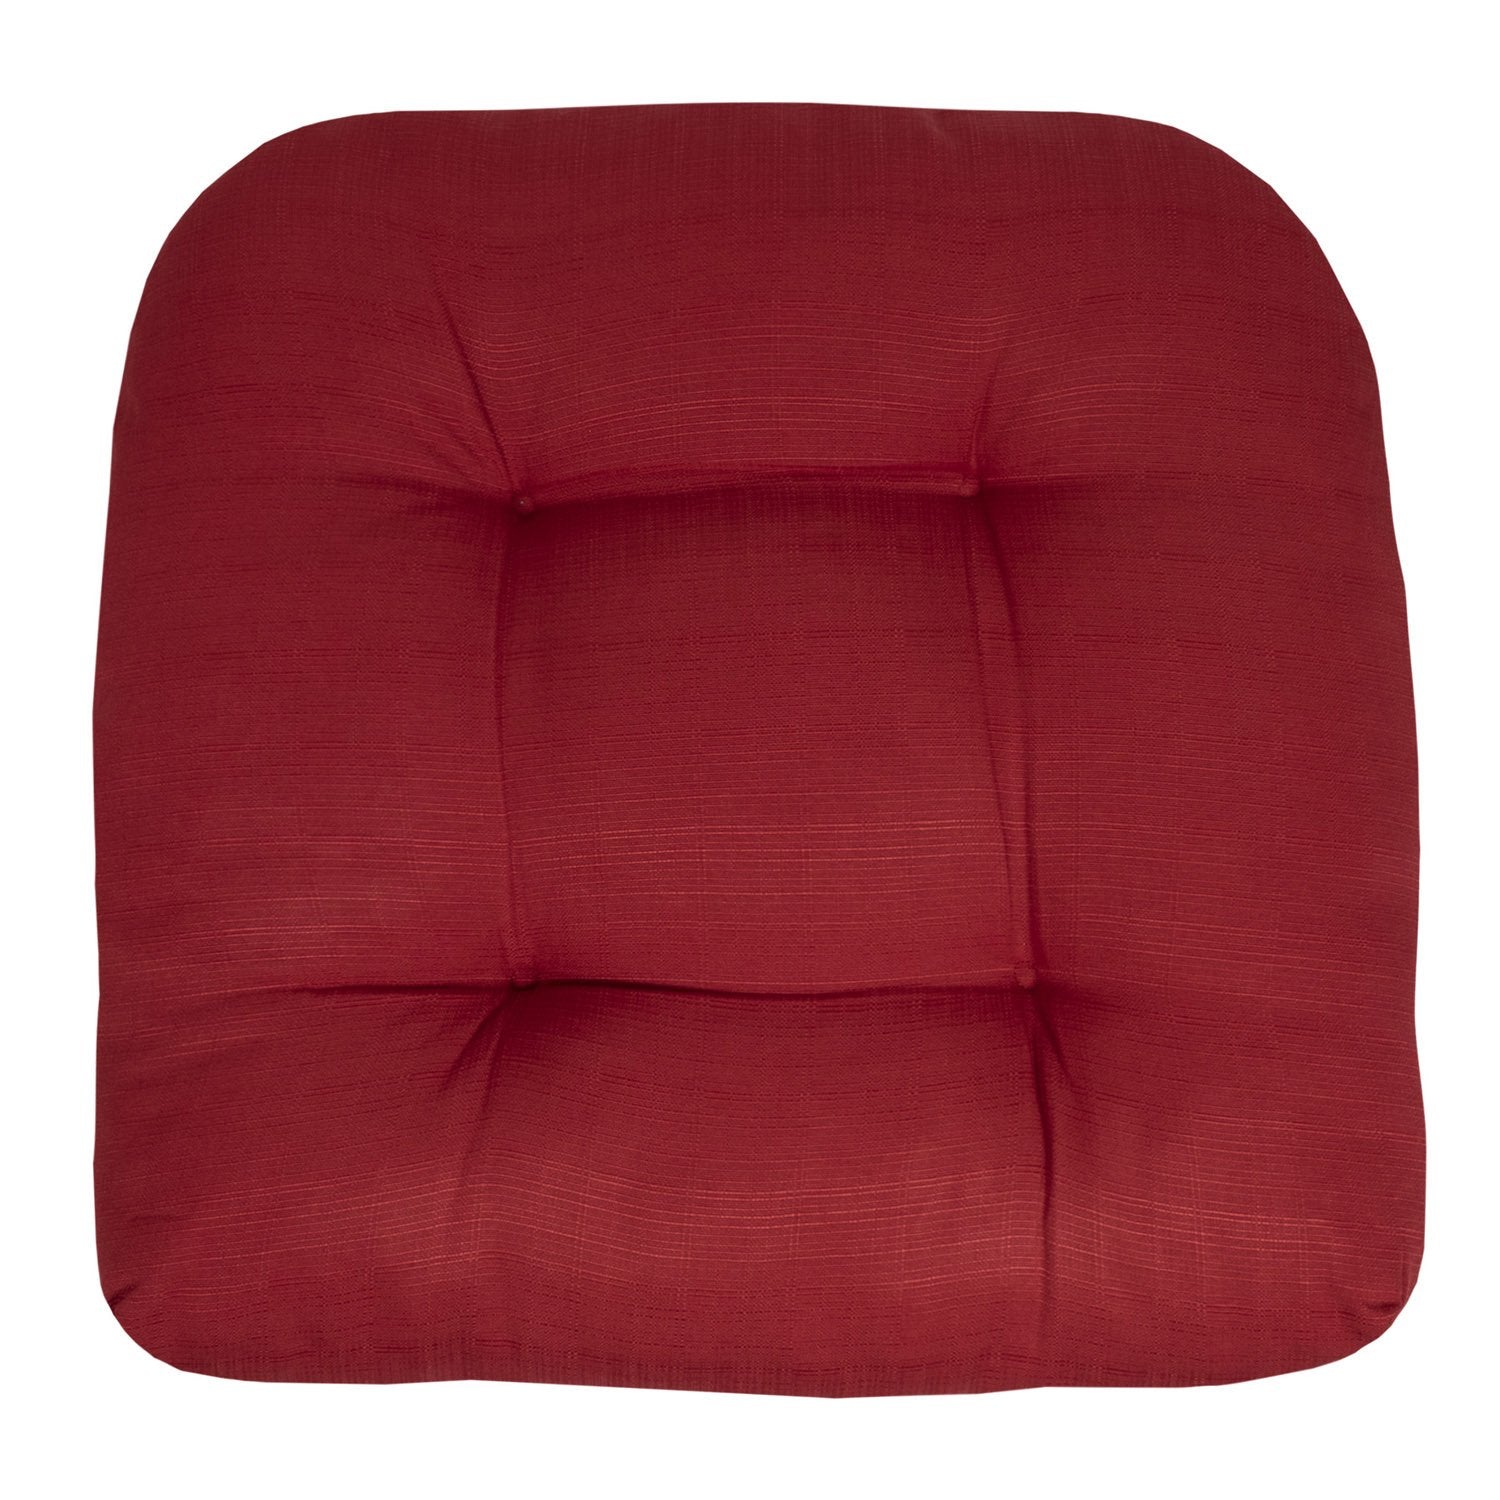 Patio Seat Cushion Set Red - Top